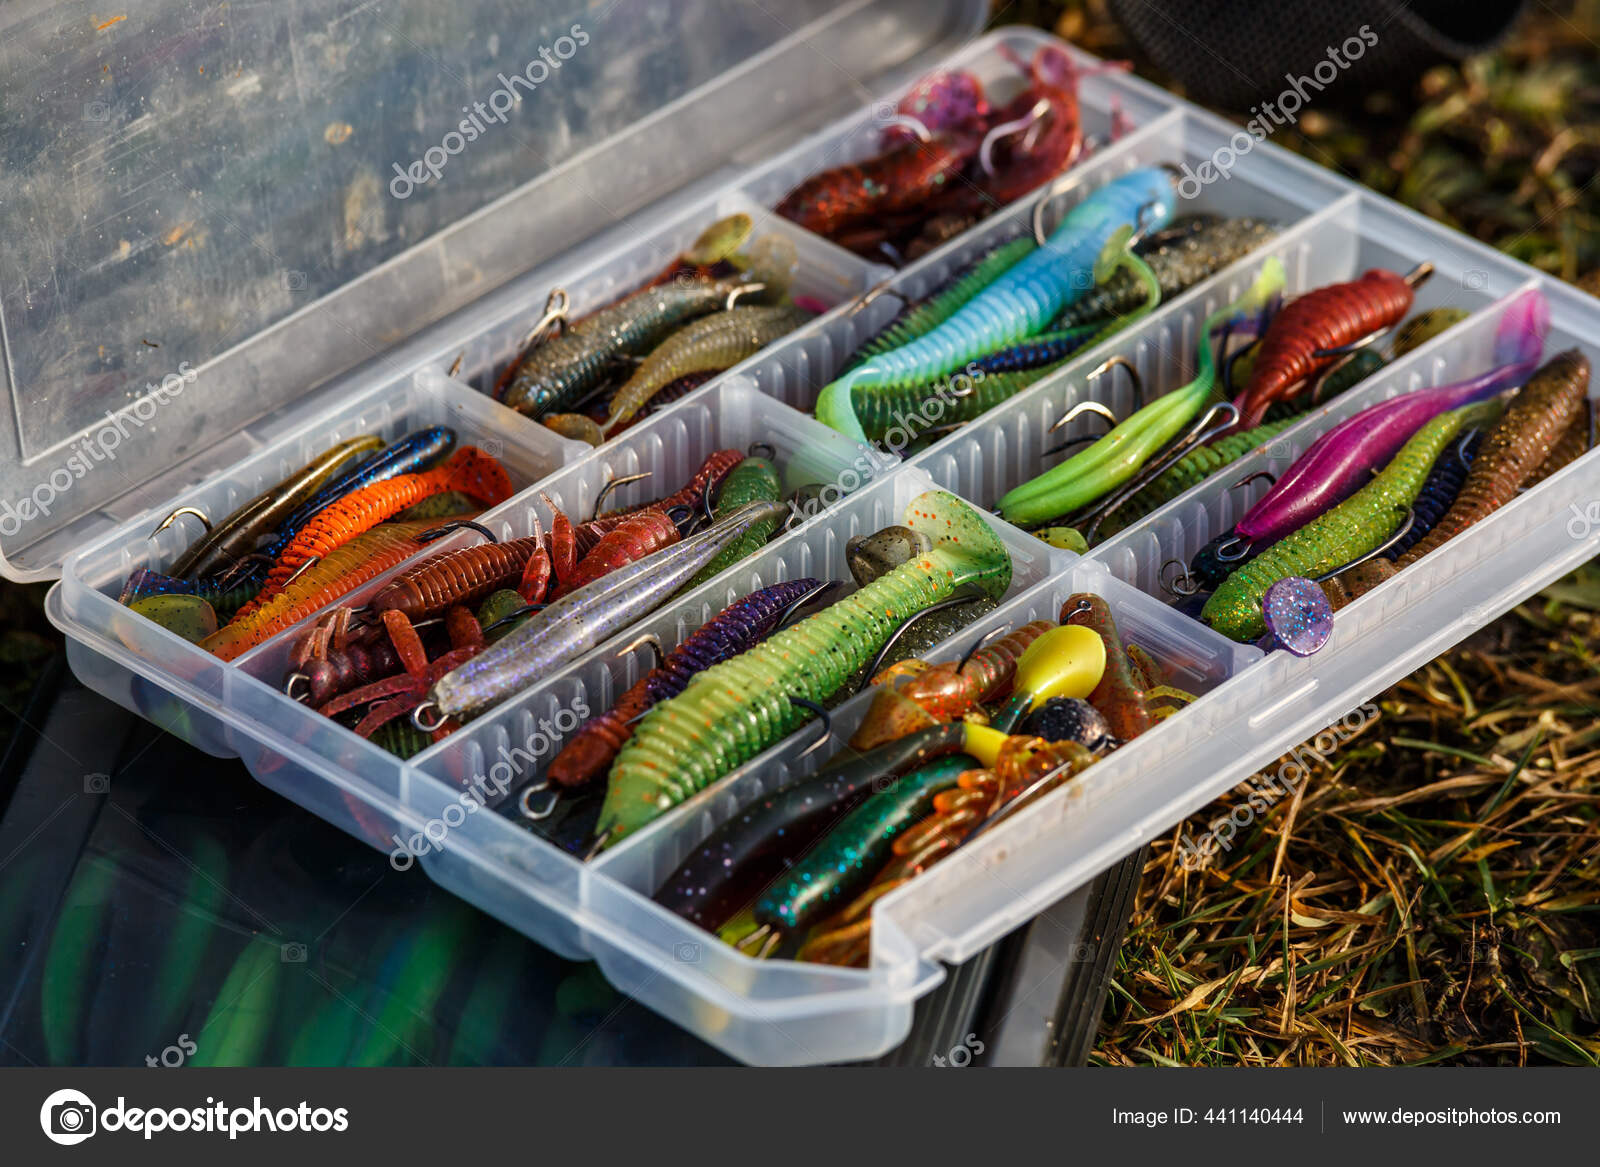 Large Fisherman's Tackle Box Fully Stocked Lures Gear Fishing